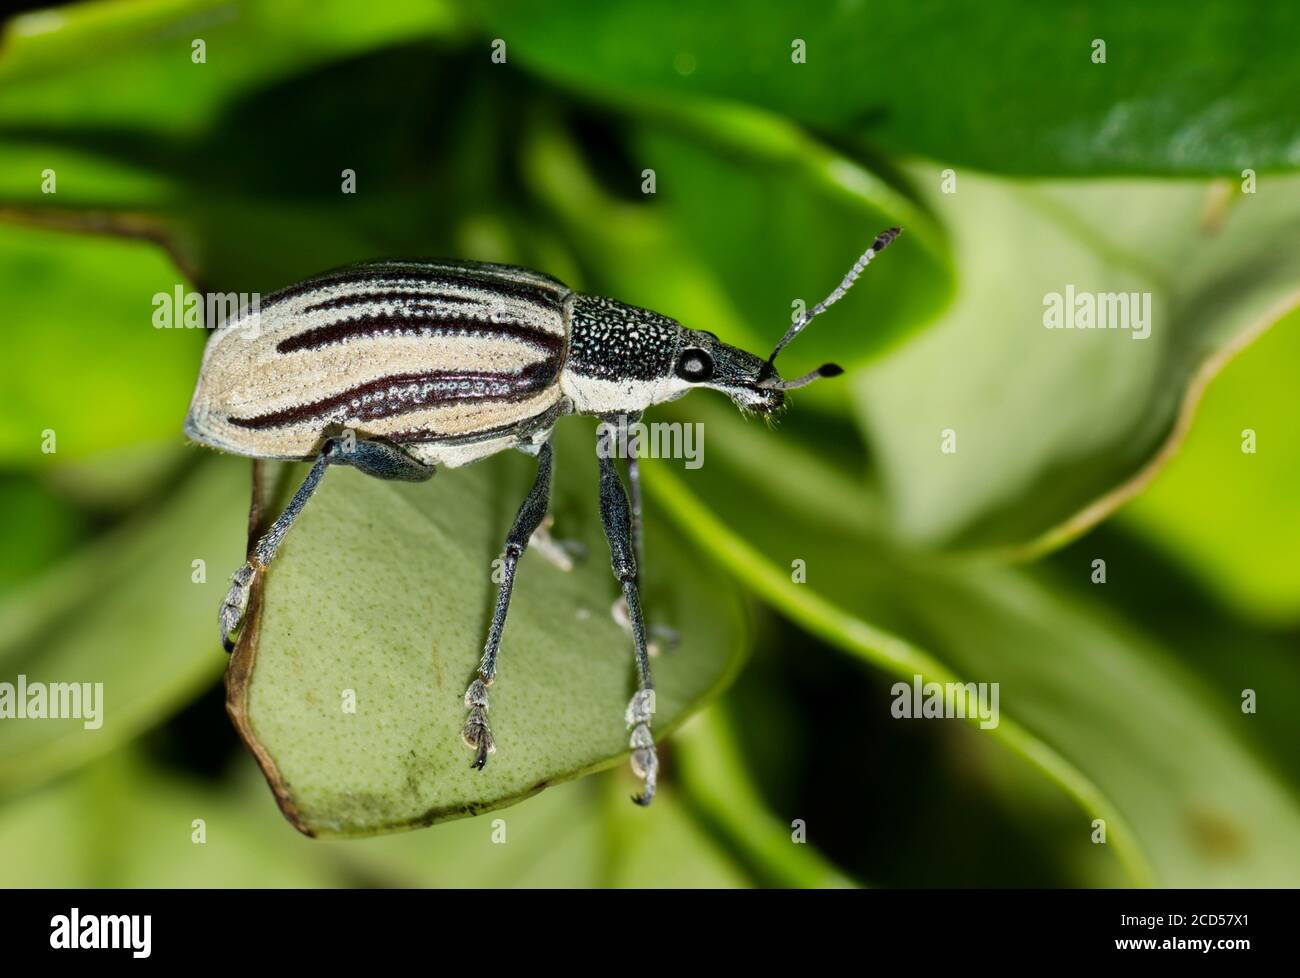 Diaprepes Root Weevil crawling through lush foliage in Houston, TX. A destructive insect that can damage many types of crops, especially citrus. Stock Photo